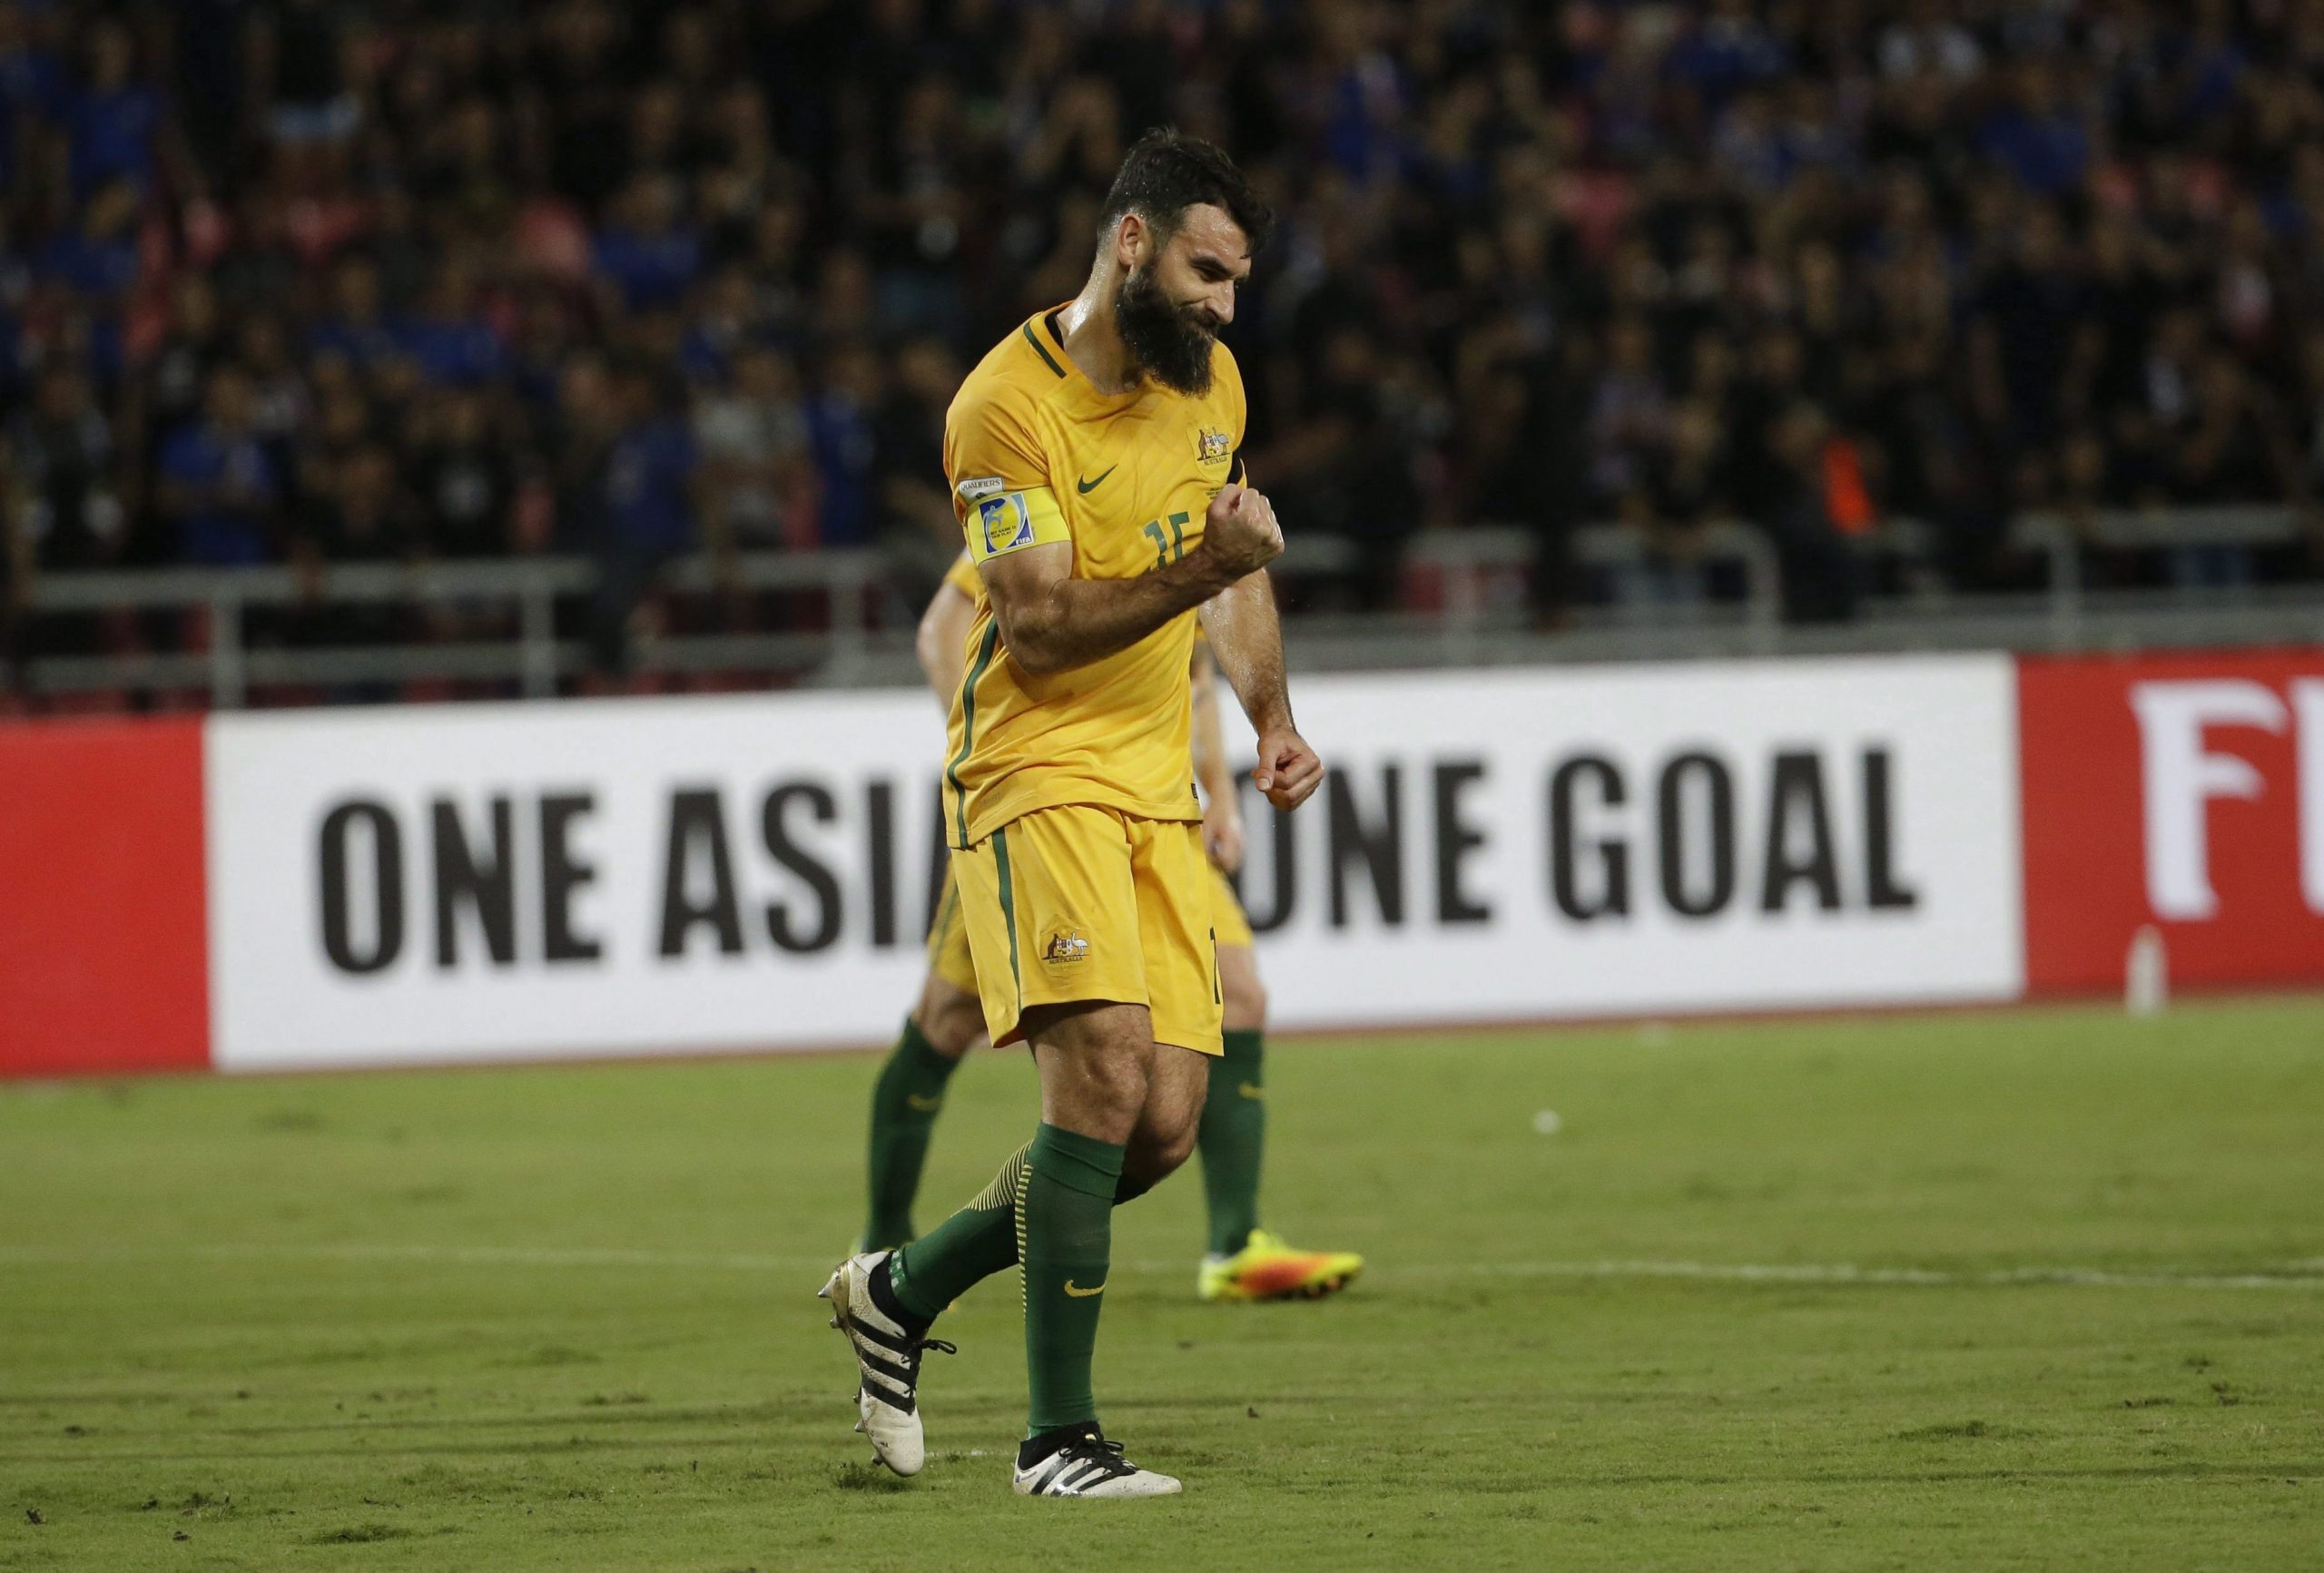 Mile-Jedinak-of-Australia-reacts-after-scoring-a-goal-during-a-2018-World-Cup-qualifier-soccer-match-against-Thailand-at-Rajamangala-national-stadium-in-Bangkok,-Thailand,-Tuesday,-Nov.-15,-2016.-(Sakchai-Lalit/AP)